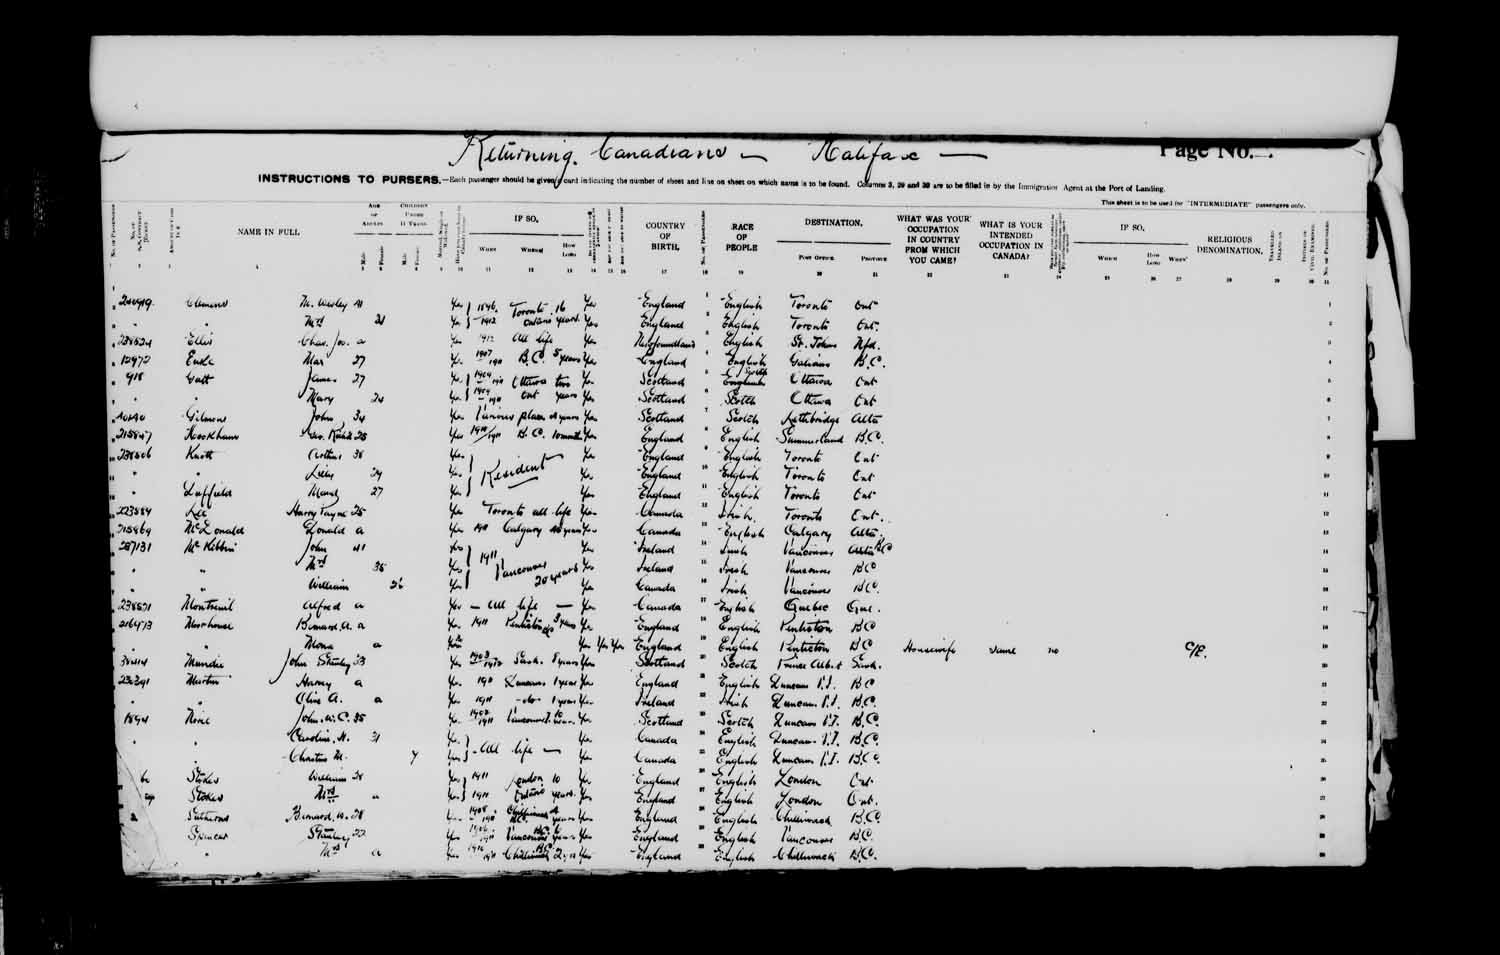 Digitized page of Passenger Lists for Image No.: e003622976